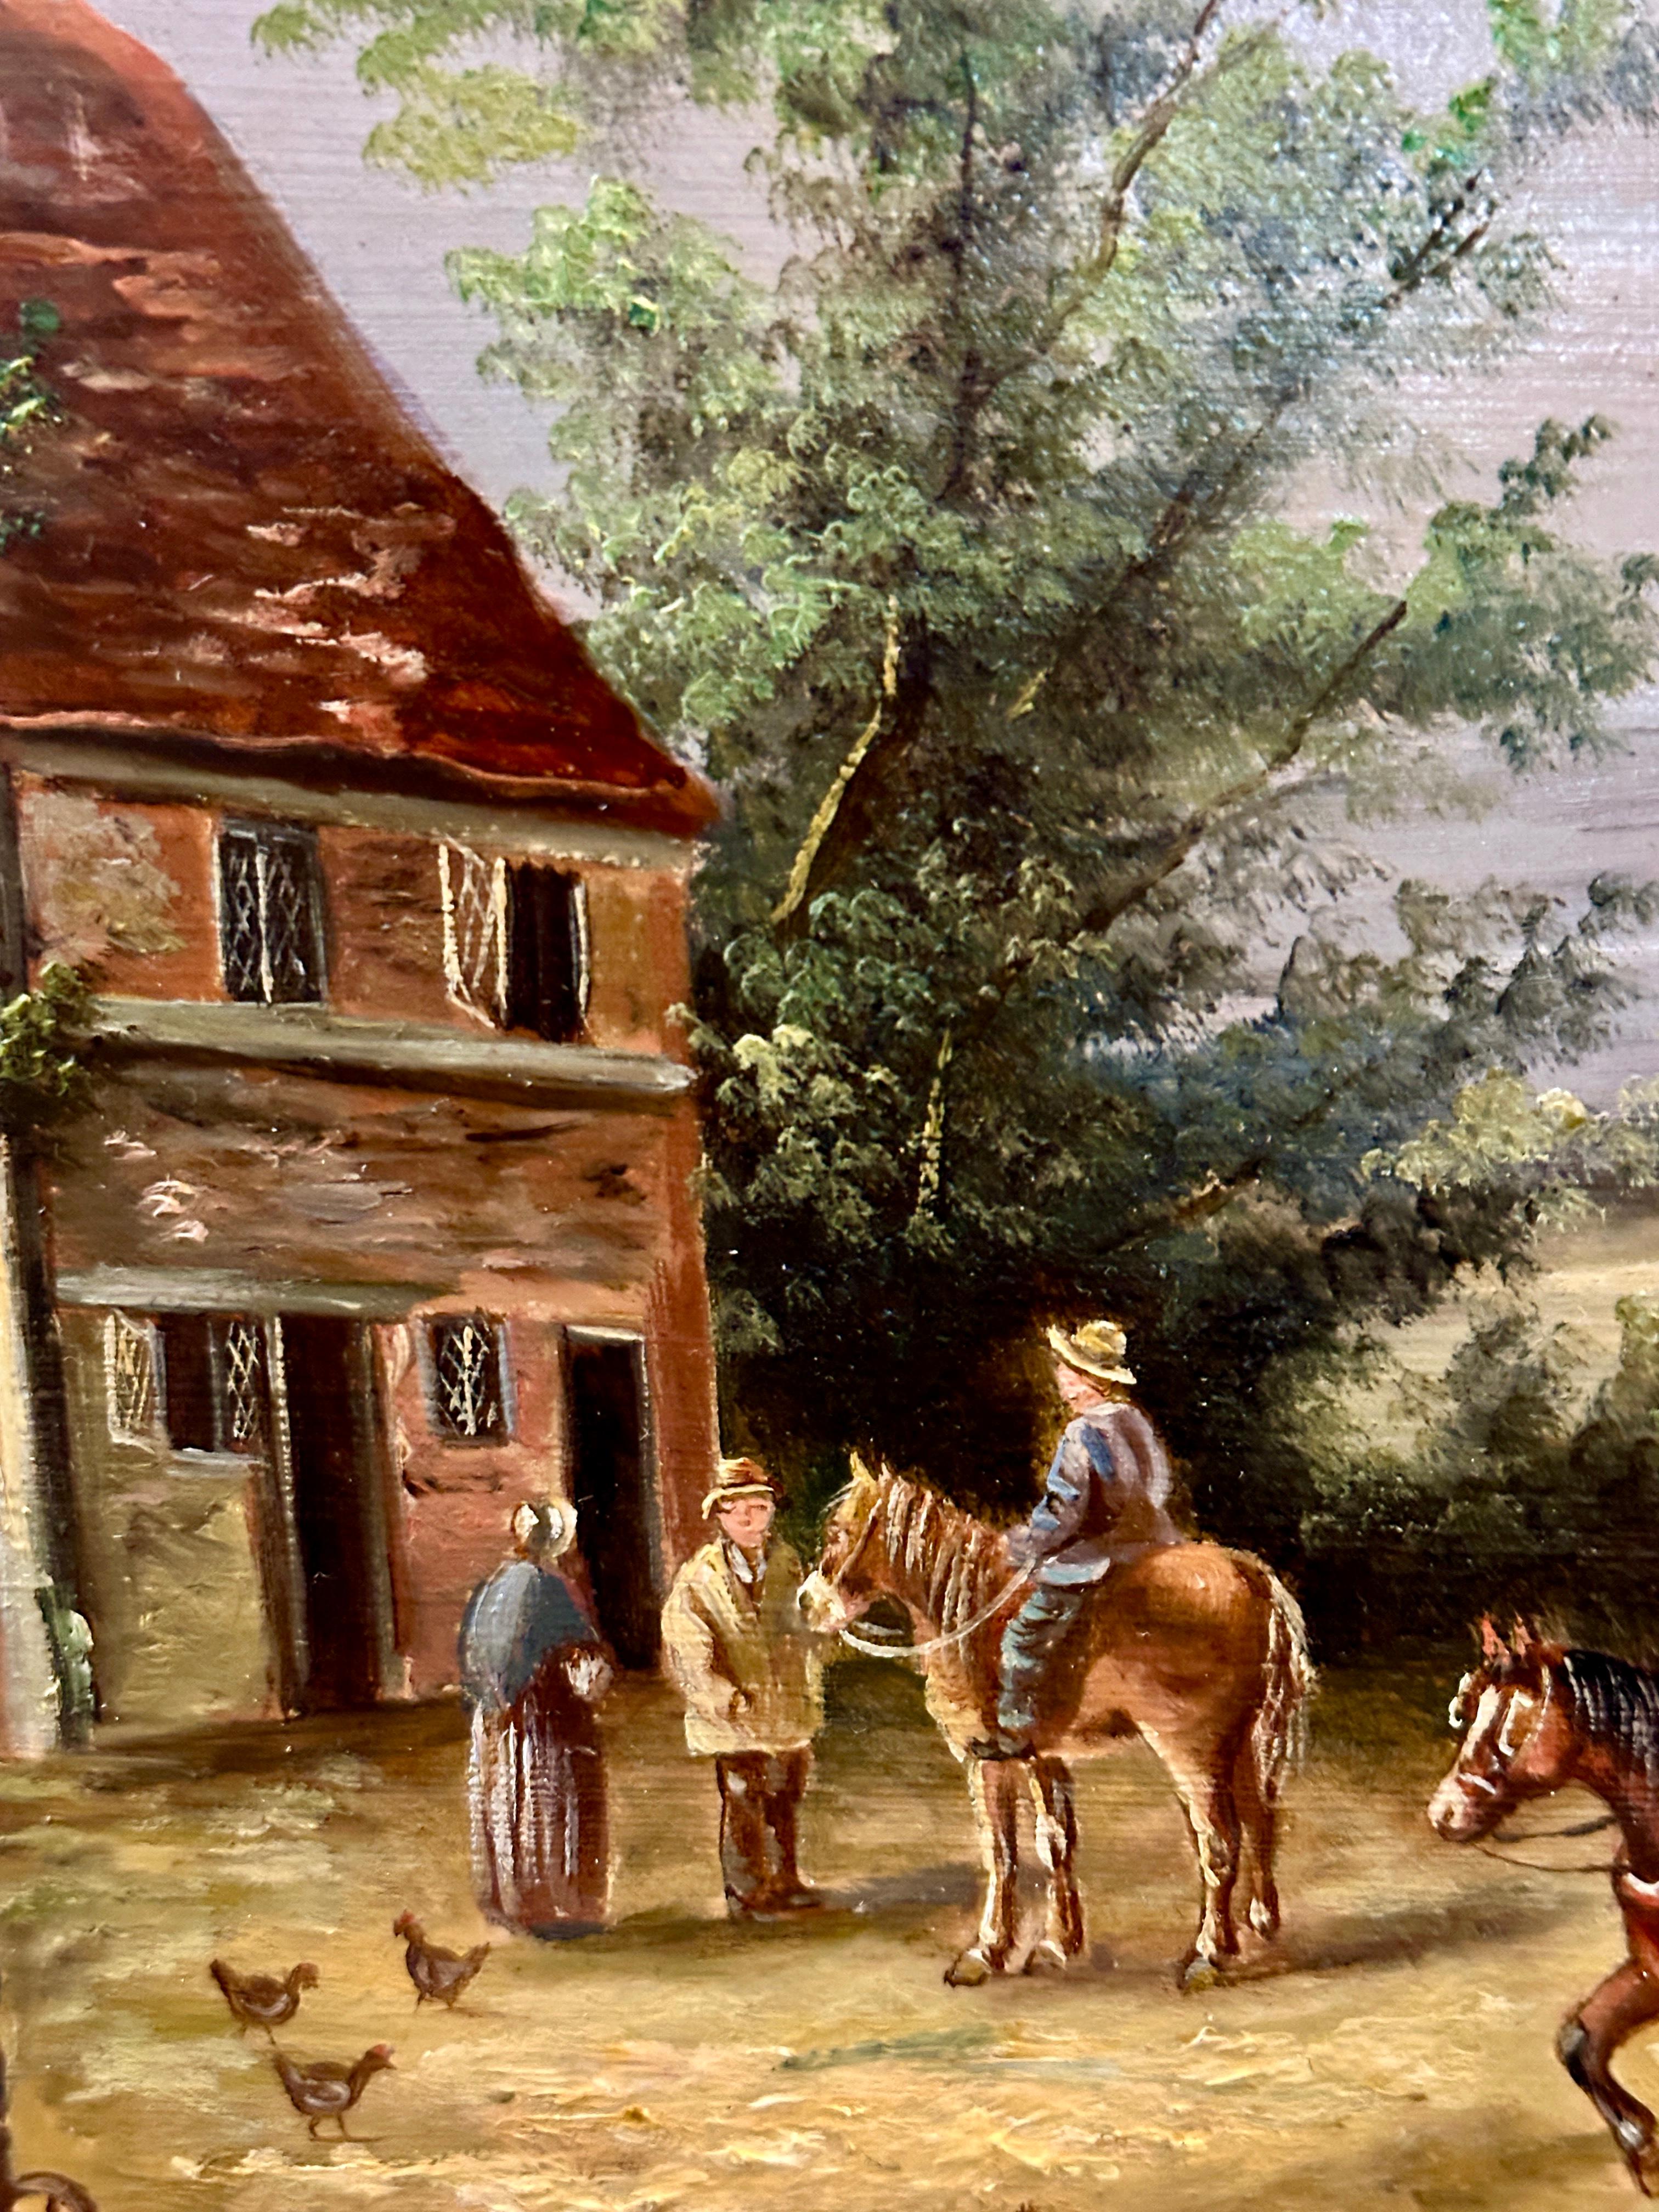 19th century English village scene with cottages, horses landscape and people For Sale 2